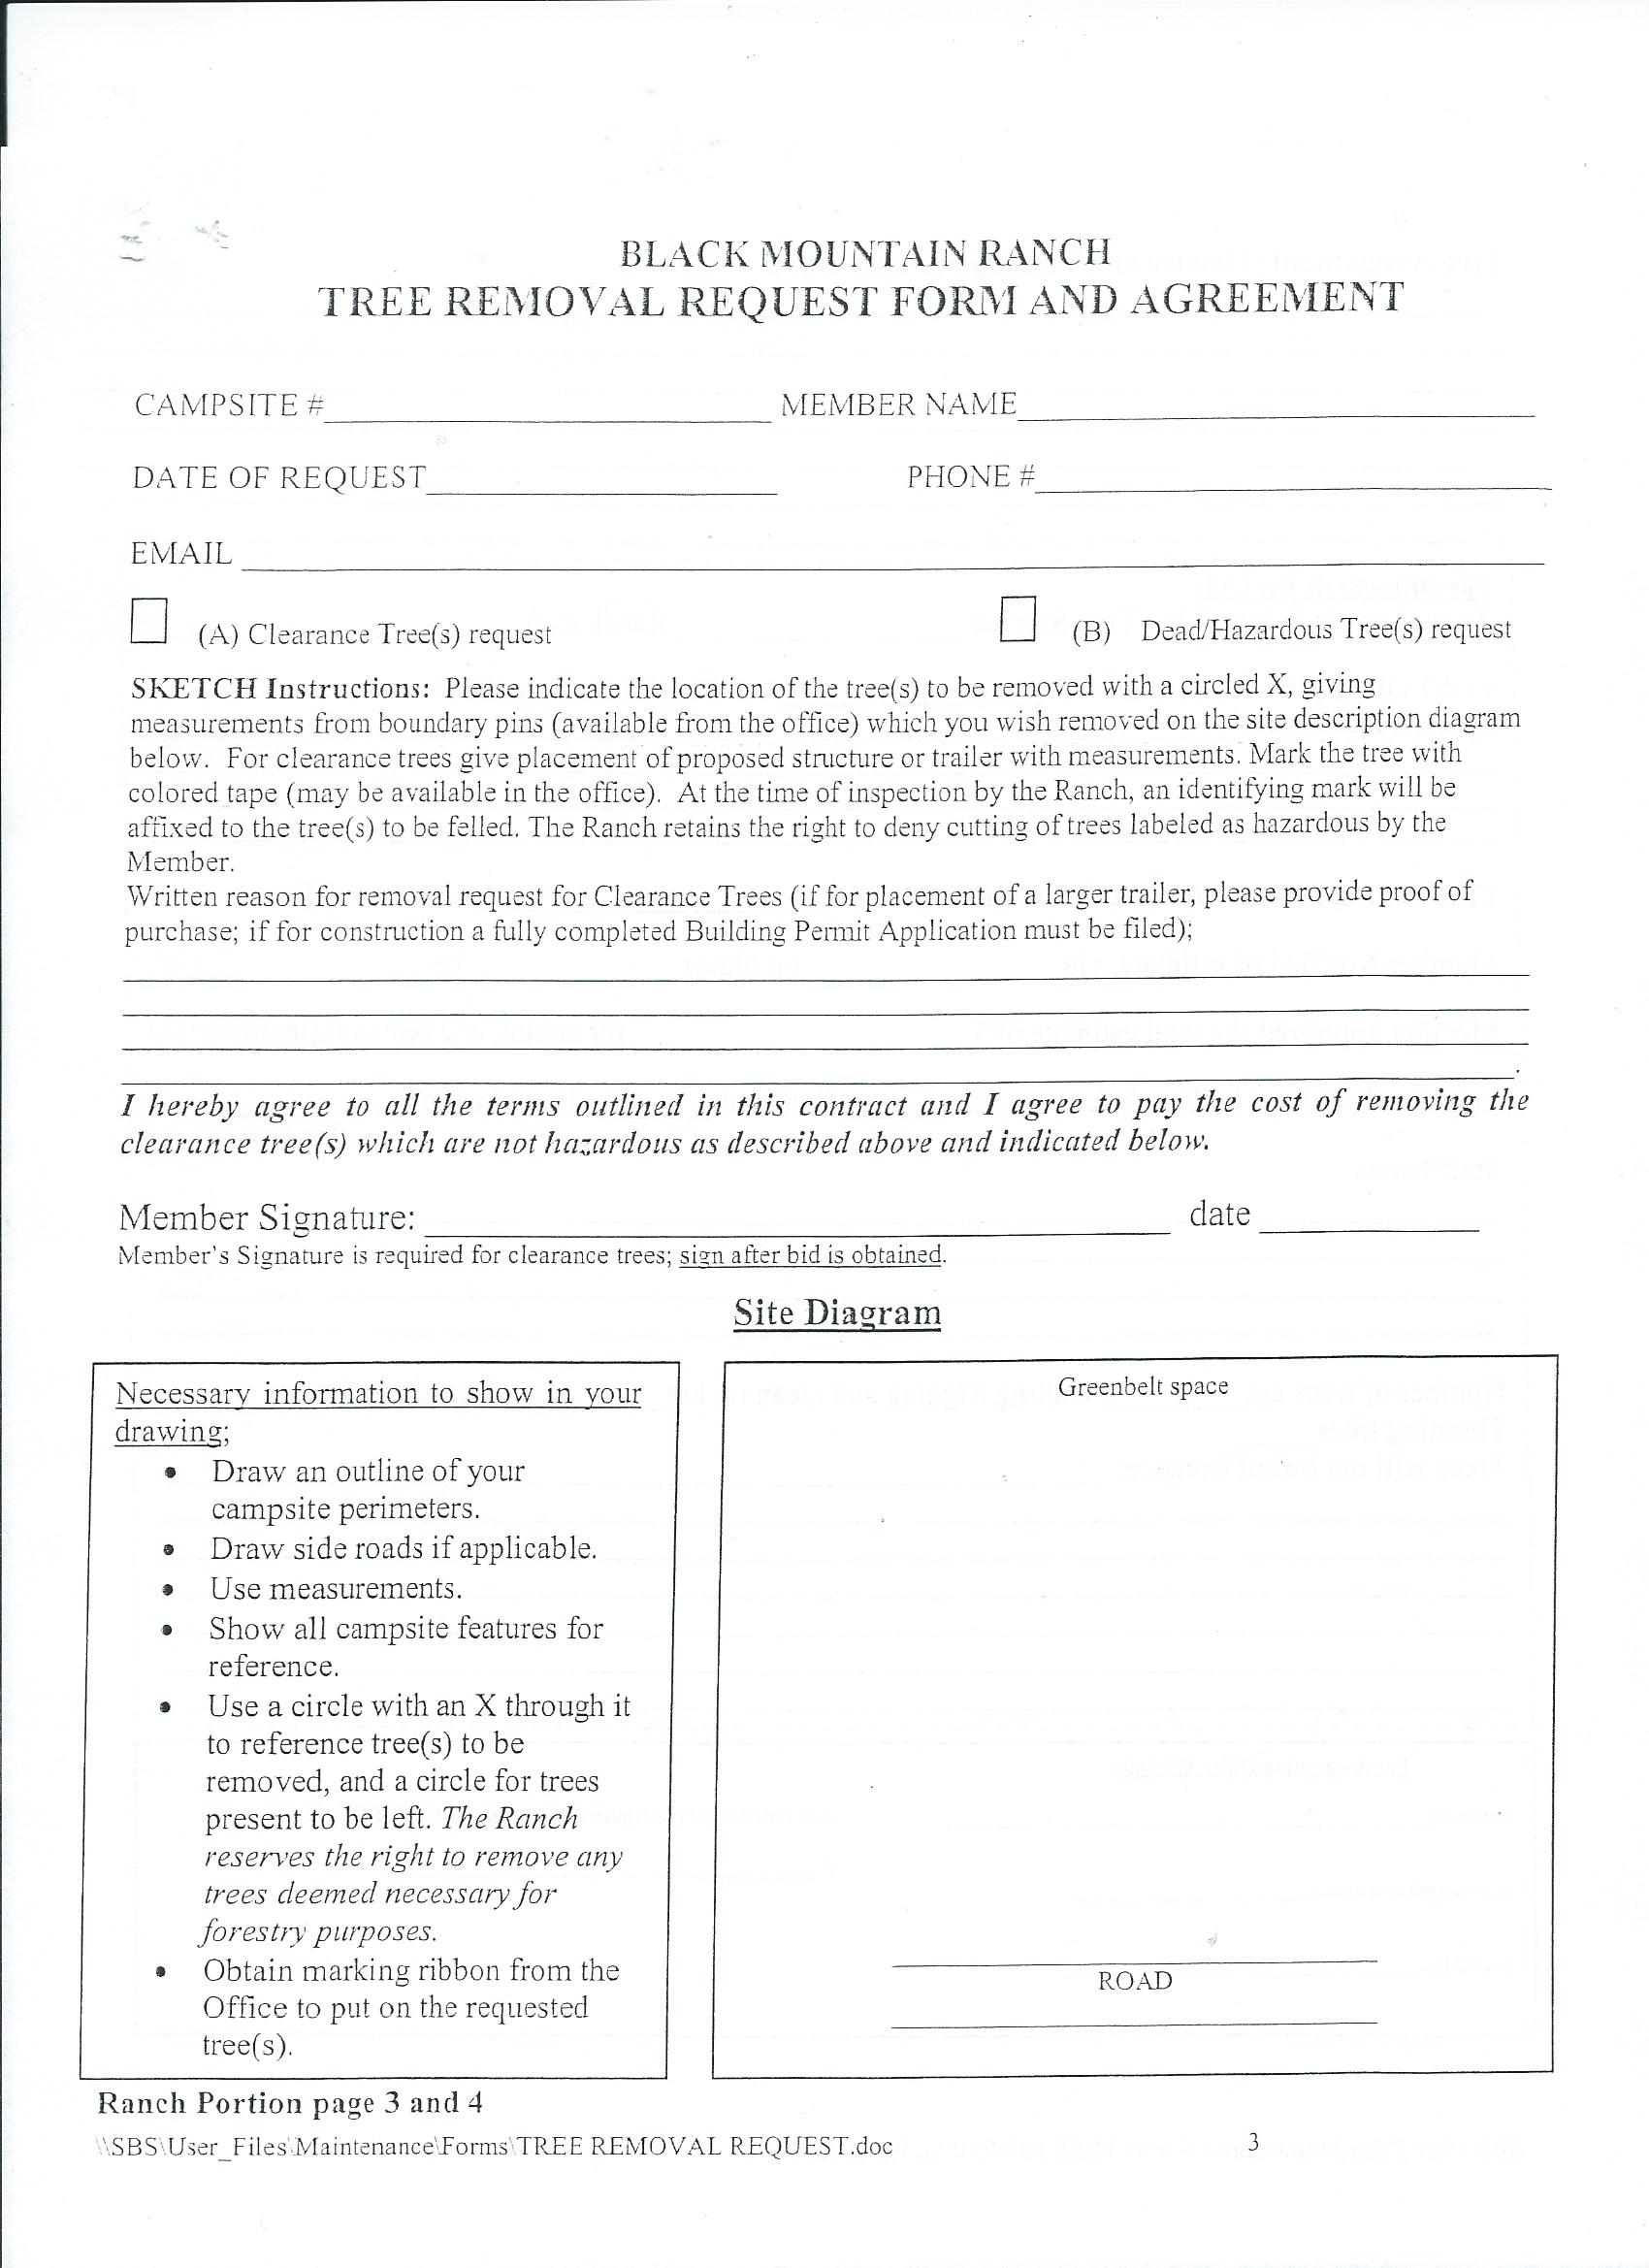 tree-removal-request-form-and-agreement-1-black-mountain-ranch-campground